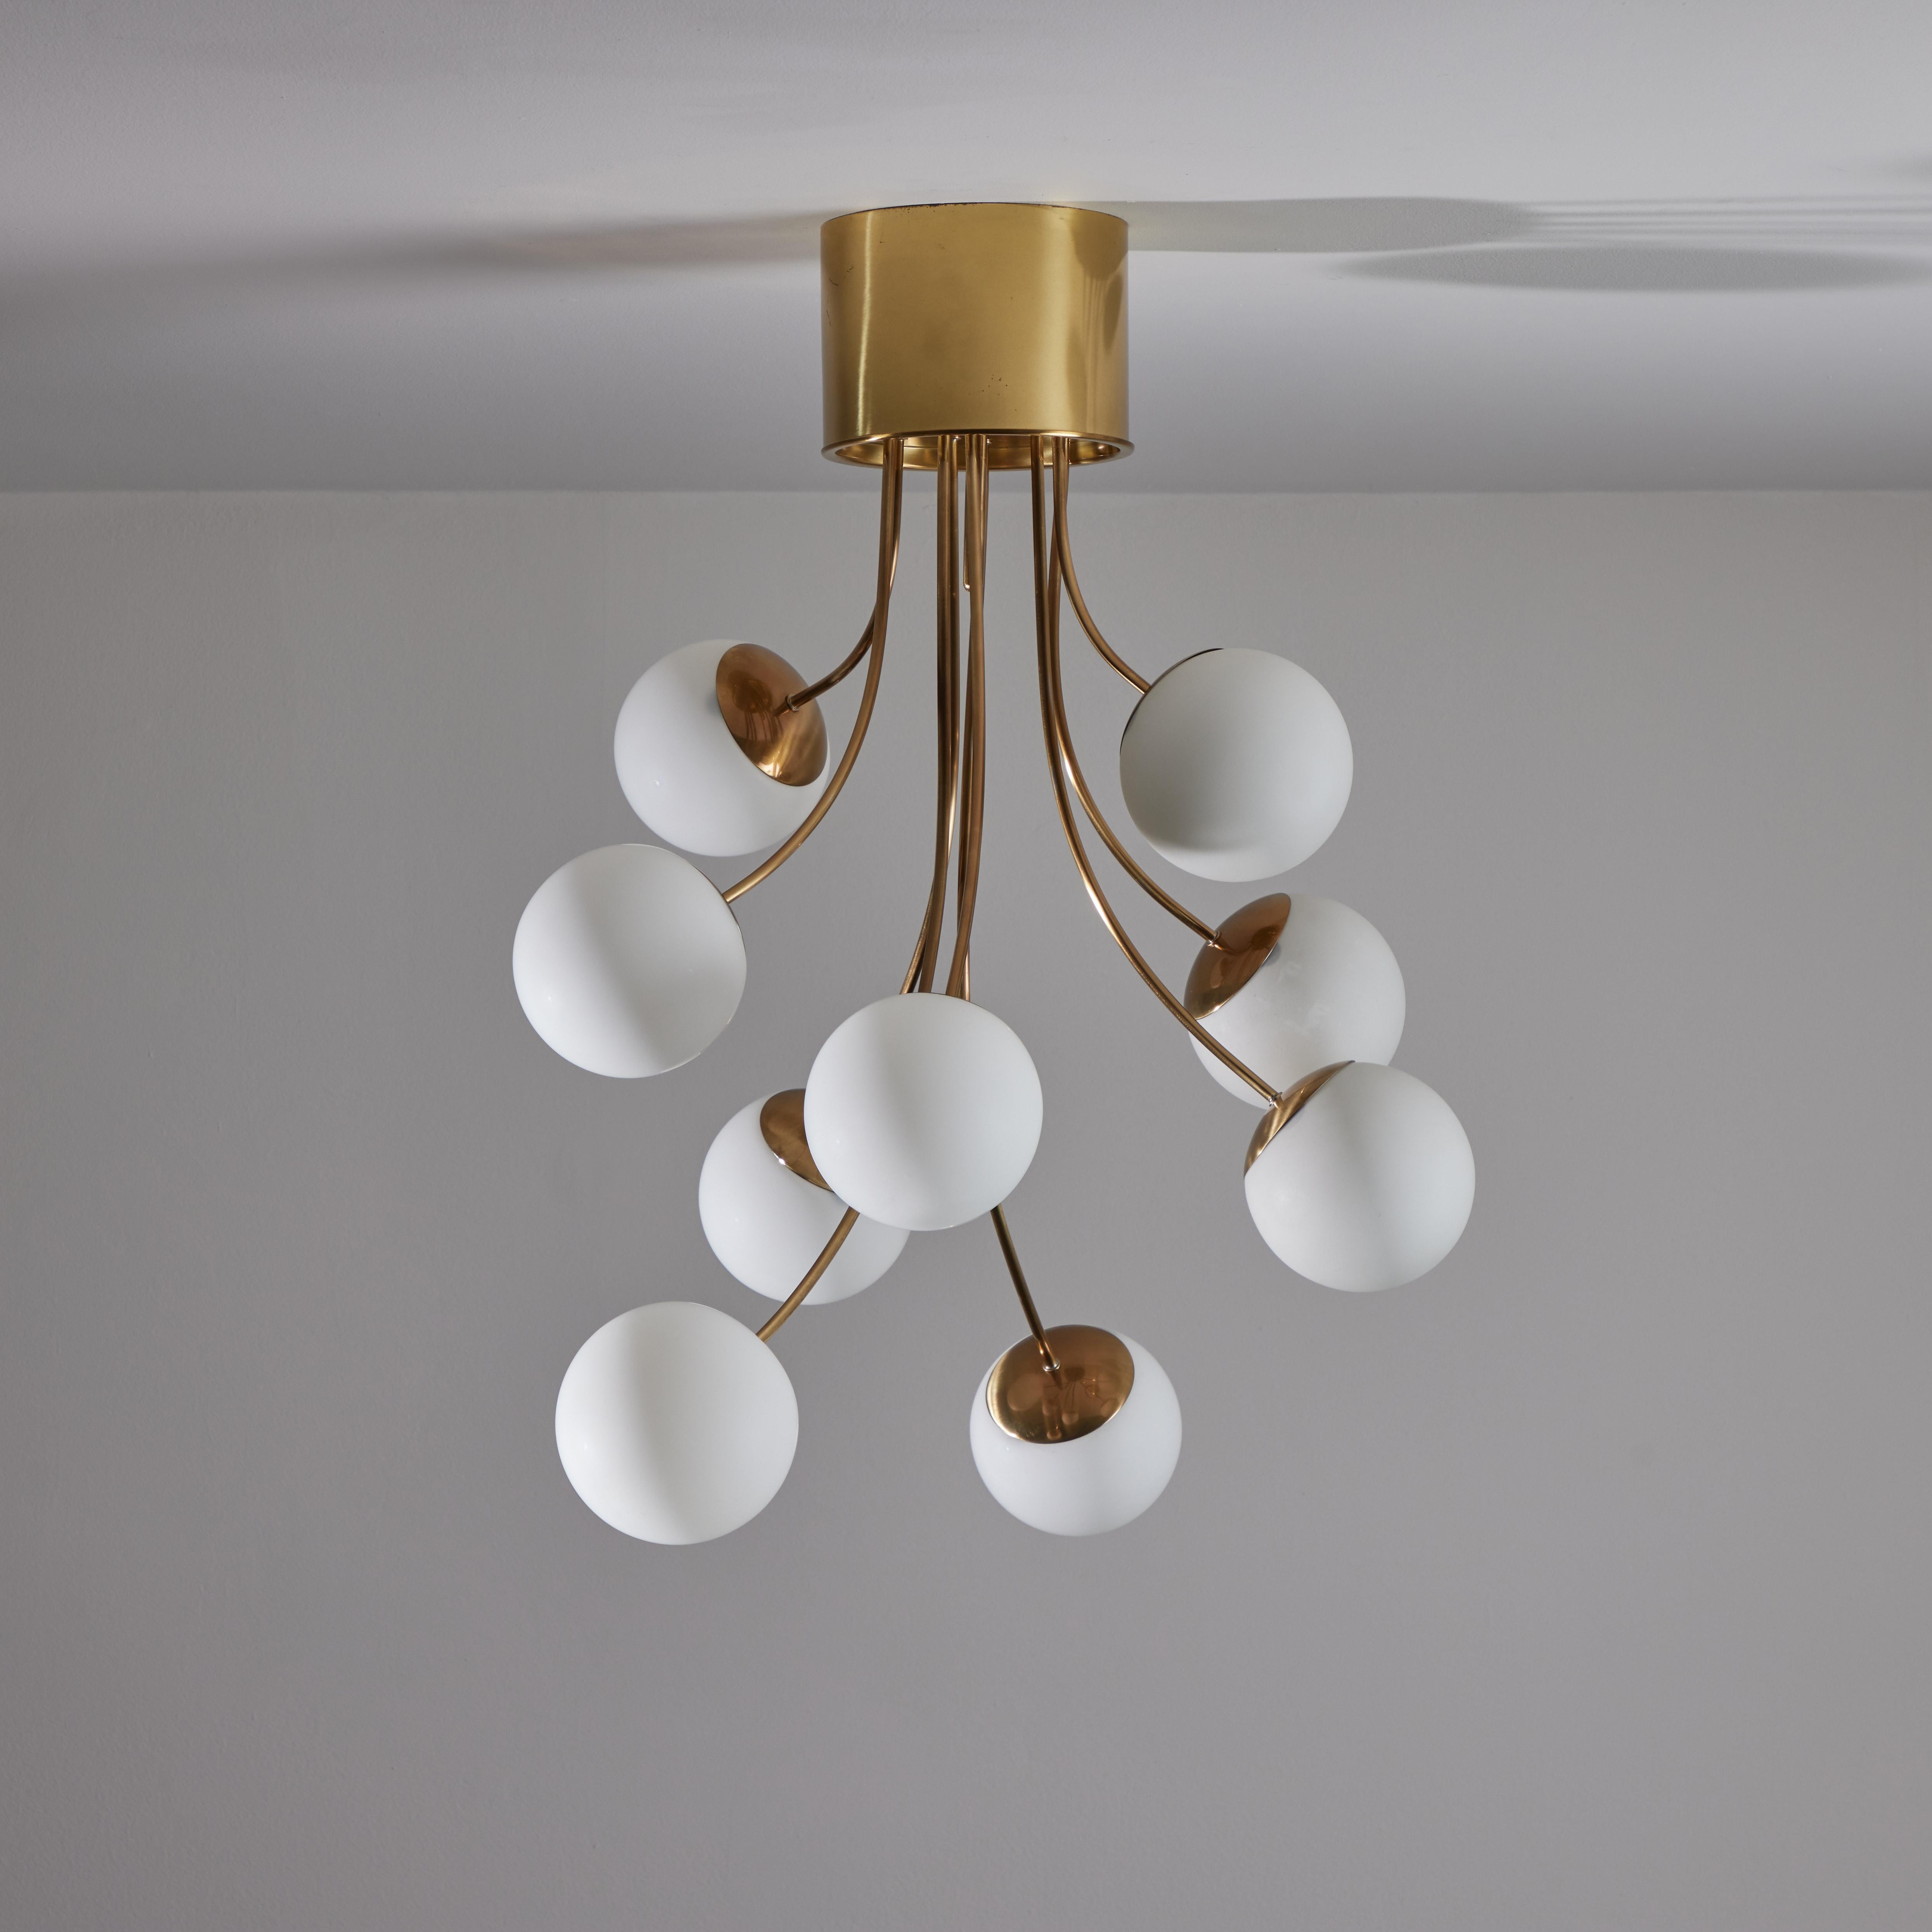 Rare chandelier by Pia Guidetti Crippa for Lumi. Strong similarities to the Model 1036/15 floor and table lamps. Designed and manufactured in Italy circa the 1970s. Polished brass housing with single pole rods extending out for every light globe.